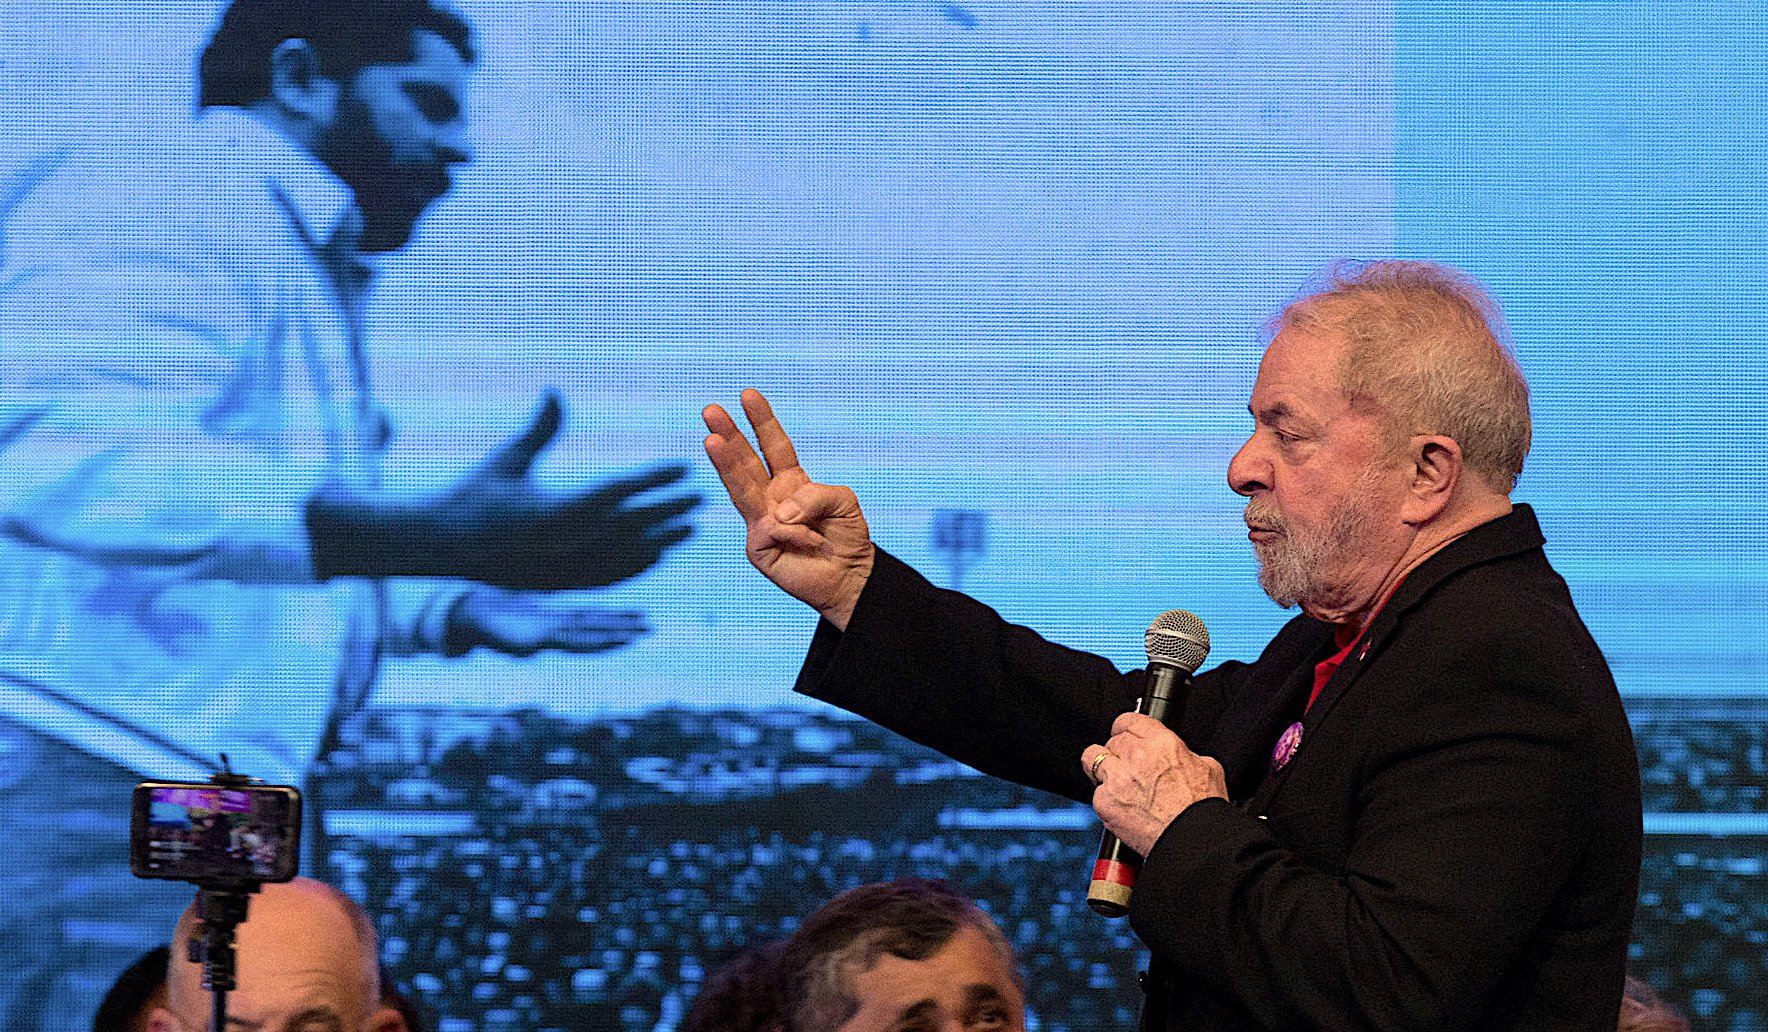 Lula da Silva speaking at the national congress of the PT Party in 2017. Photo: Lula Marques/Agência PT, CC BY 2.0.